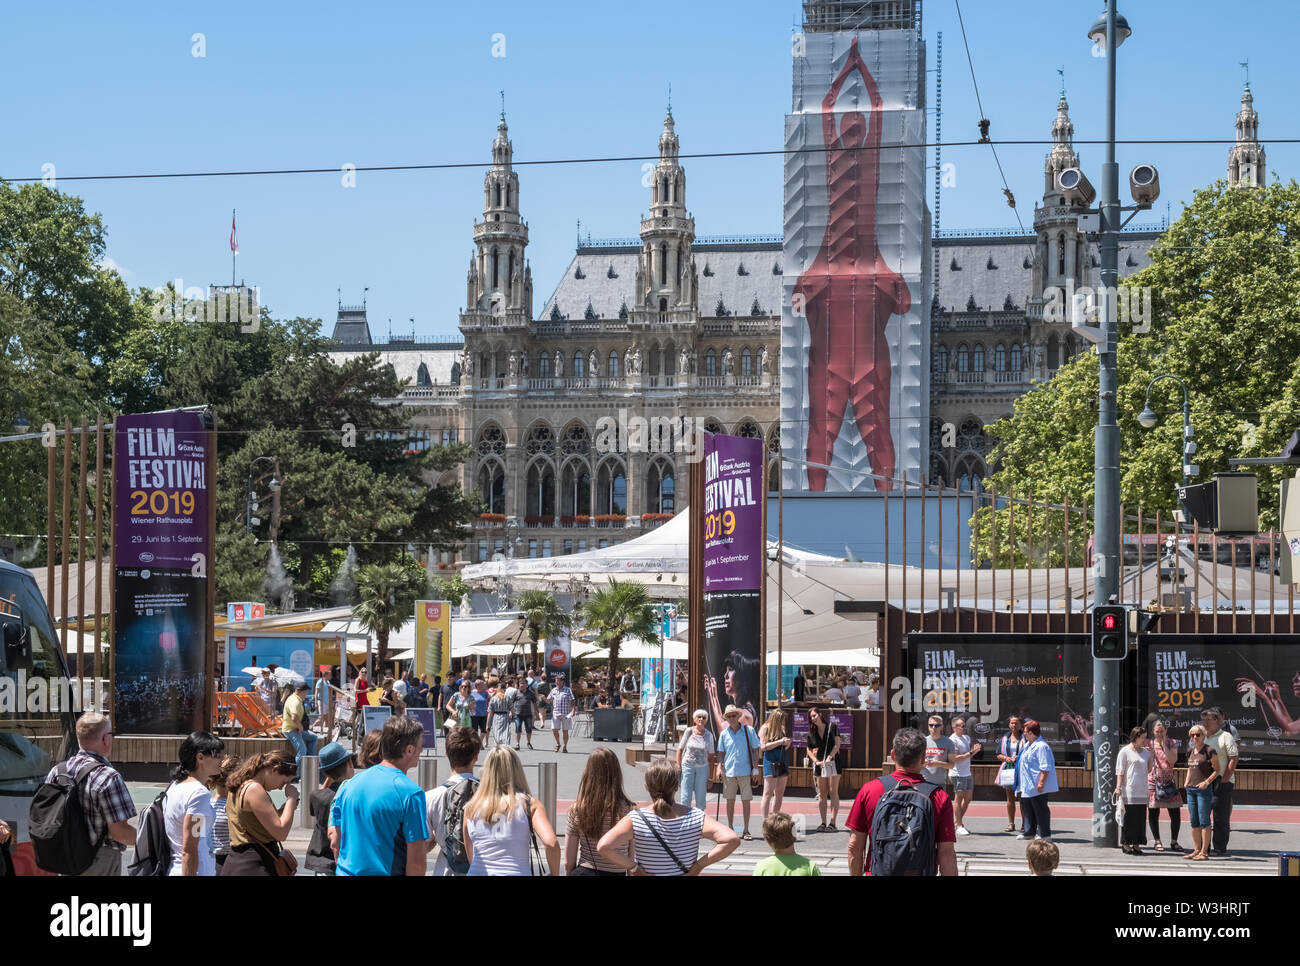 Crowds gather at the site of the Vienna Film Festival, a free annual event held in the grounds of City Hall (Rathaus), Rathausplatz, Vienna, Austria. Stock Photo